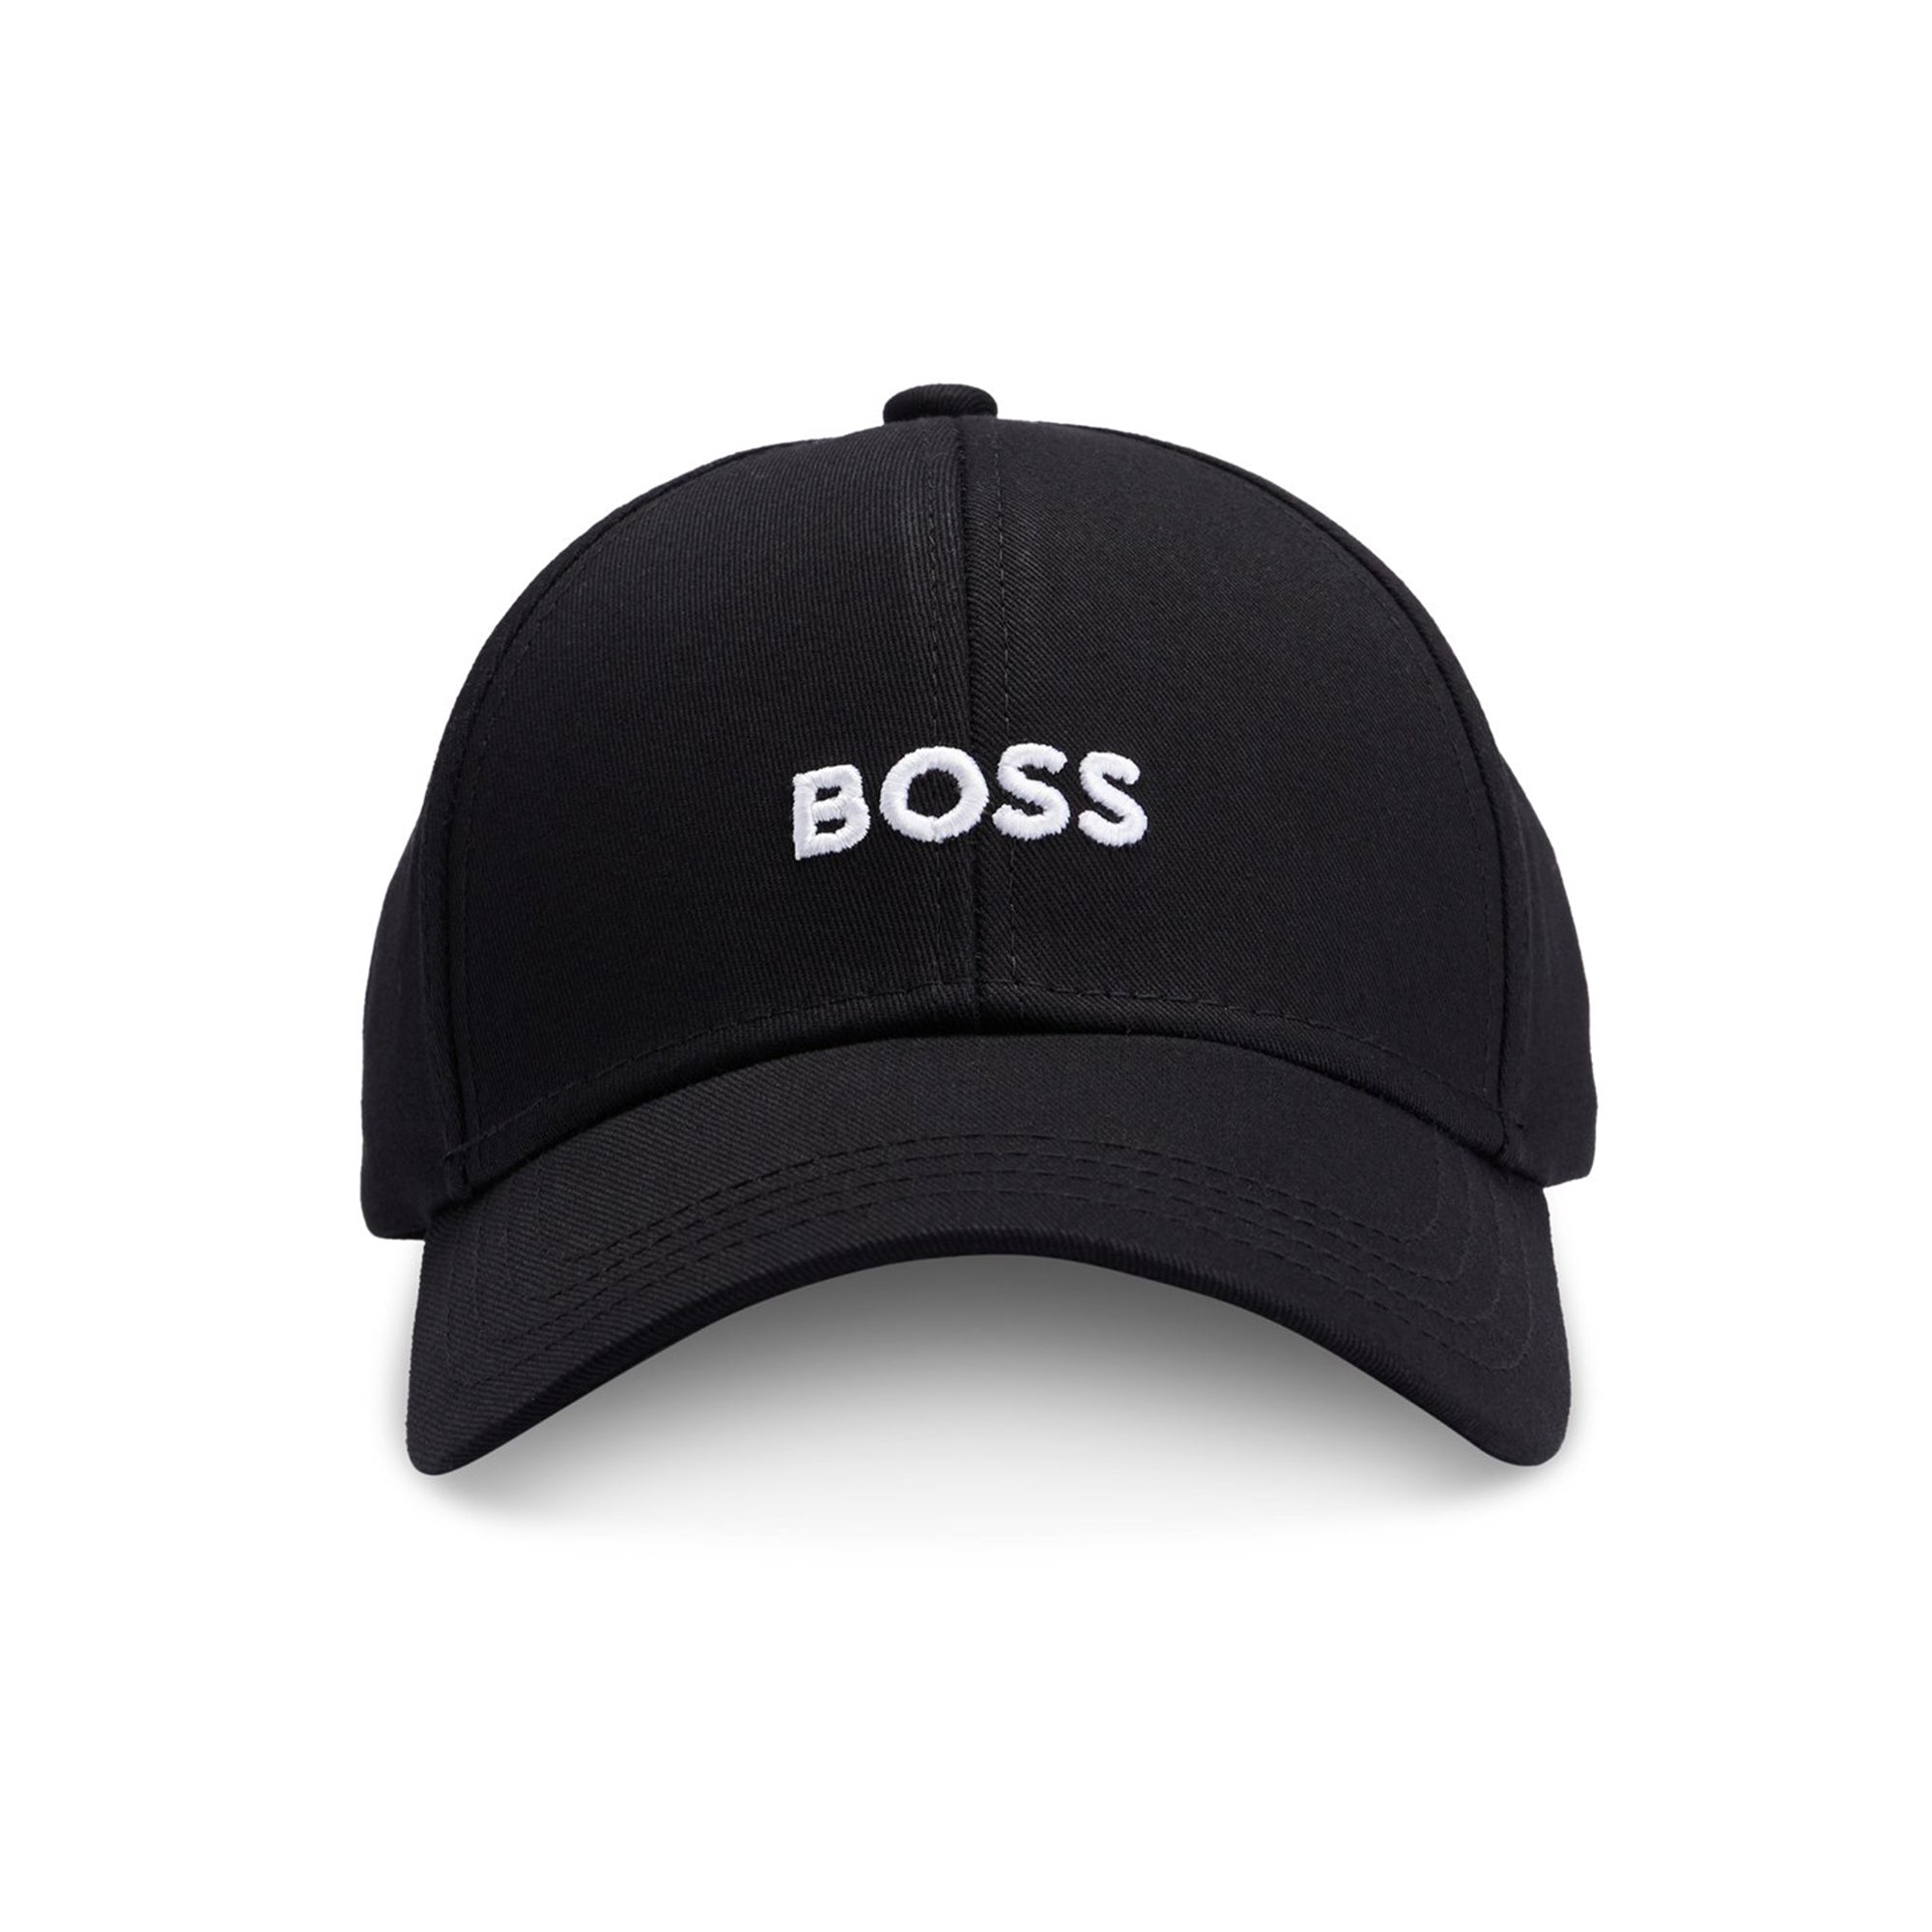 Boss Zed Embroidered Cotton Cap - Black